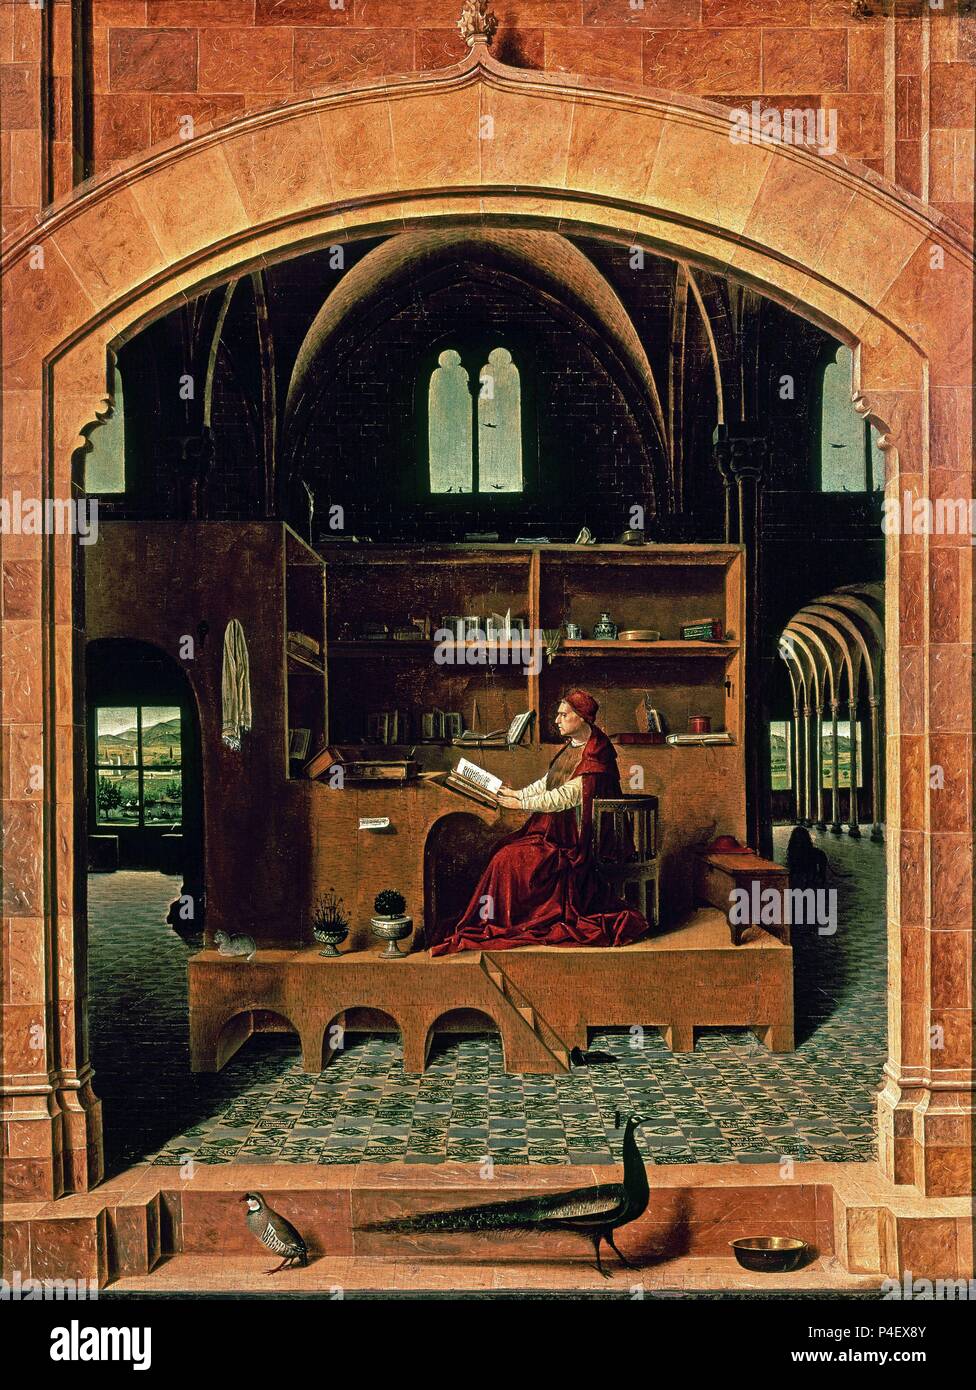 St. Jerome in his Study. c.1475. Oil on wood (46 x 36.5 cm). London, National Gallery. Author: Antonello da Messina (c. 1430-1479). Location: NATIONAL GALLERY, LONDON, ENGLAND. Stock Photo